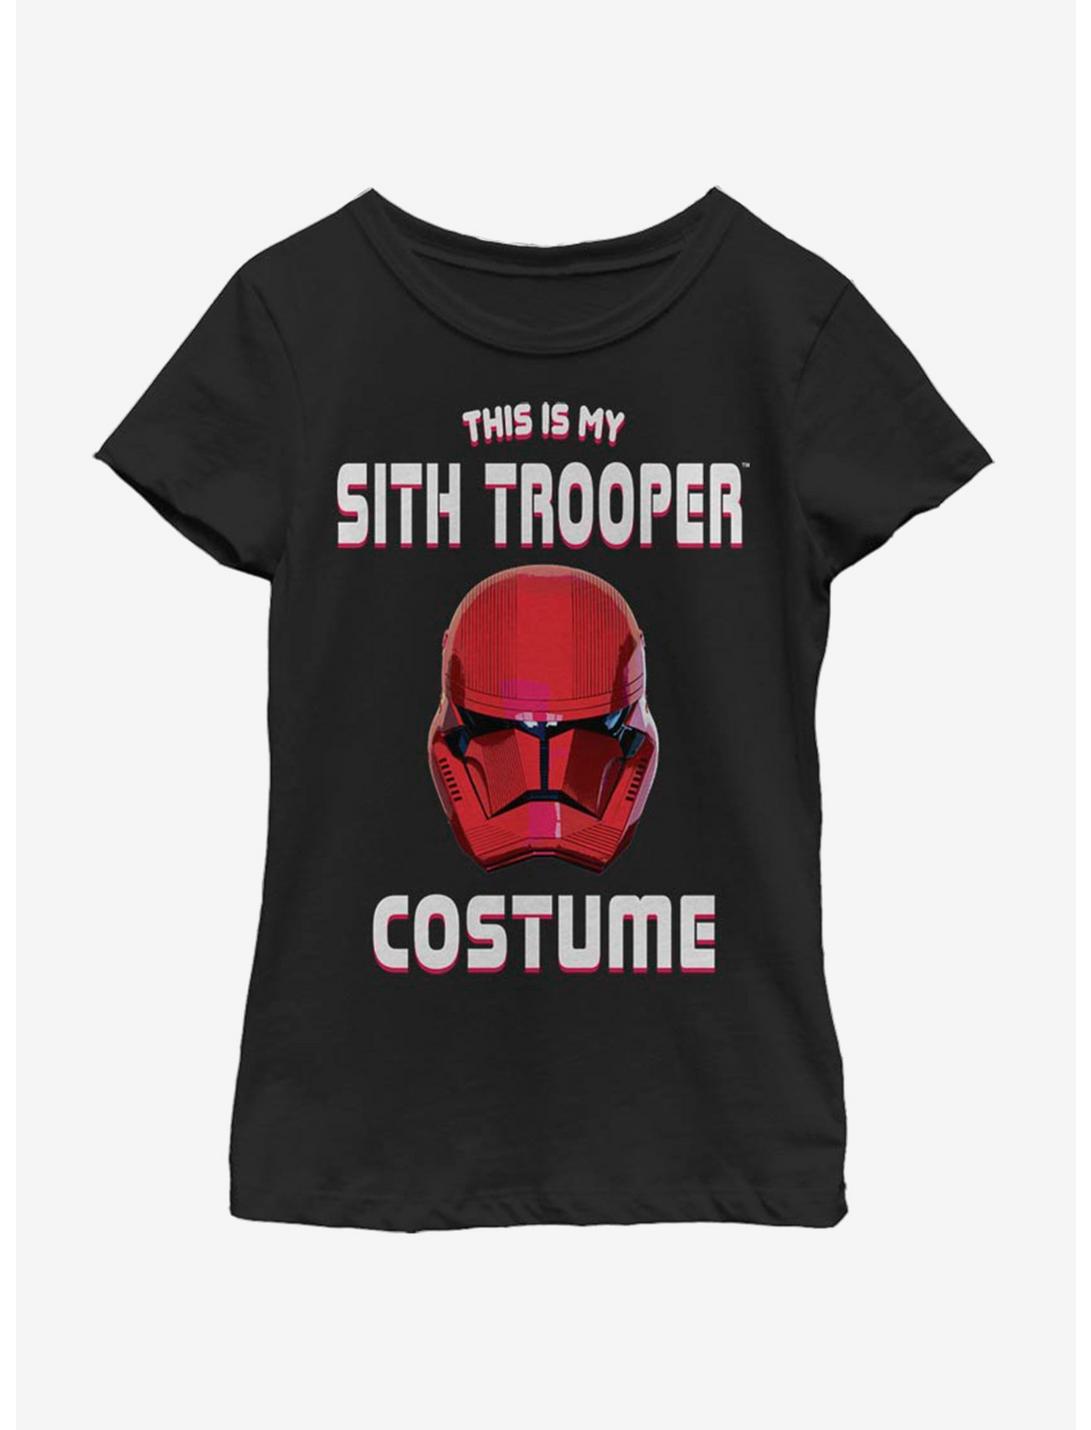 Star Wars The Rise Of Skywalker Sith Trooper Costume Youth Girls T-Shirt, BLACK, hi-res